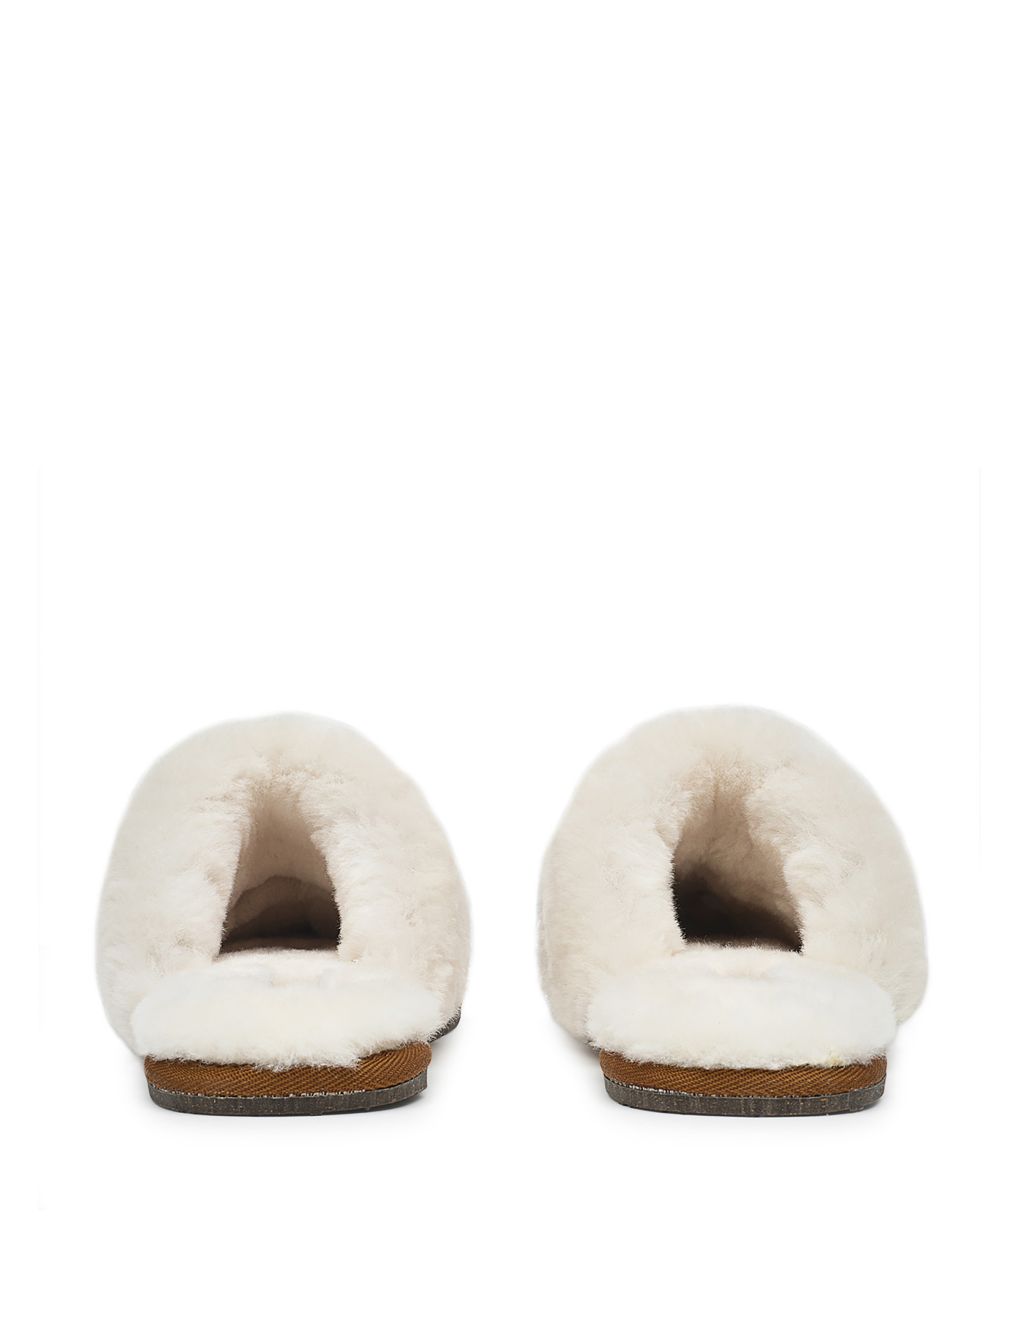 Suede Shearling Mule Slippers image 2